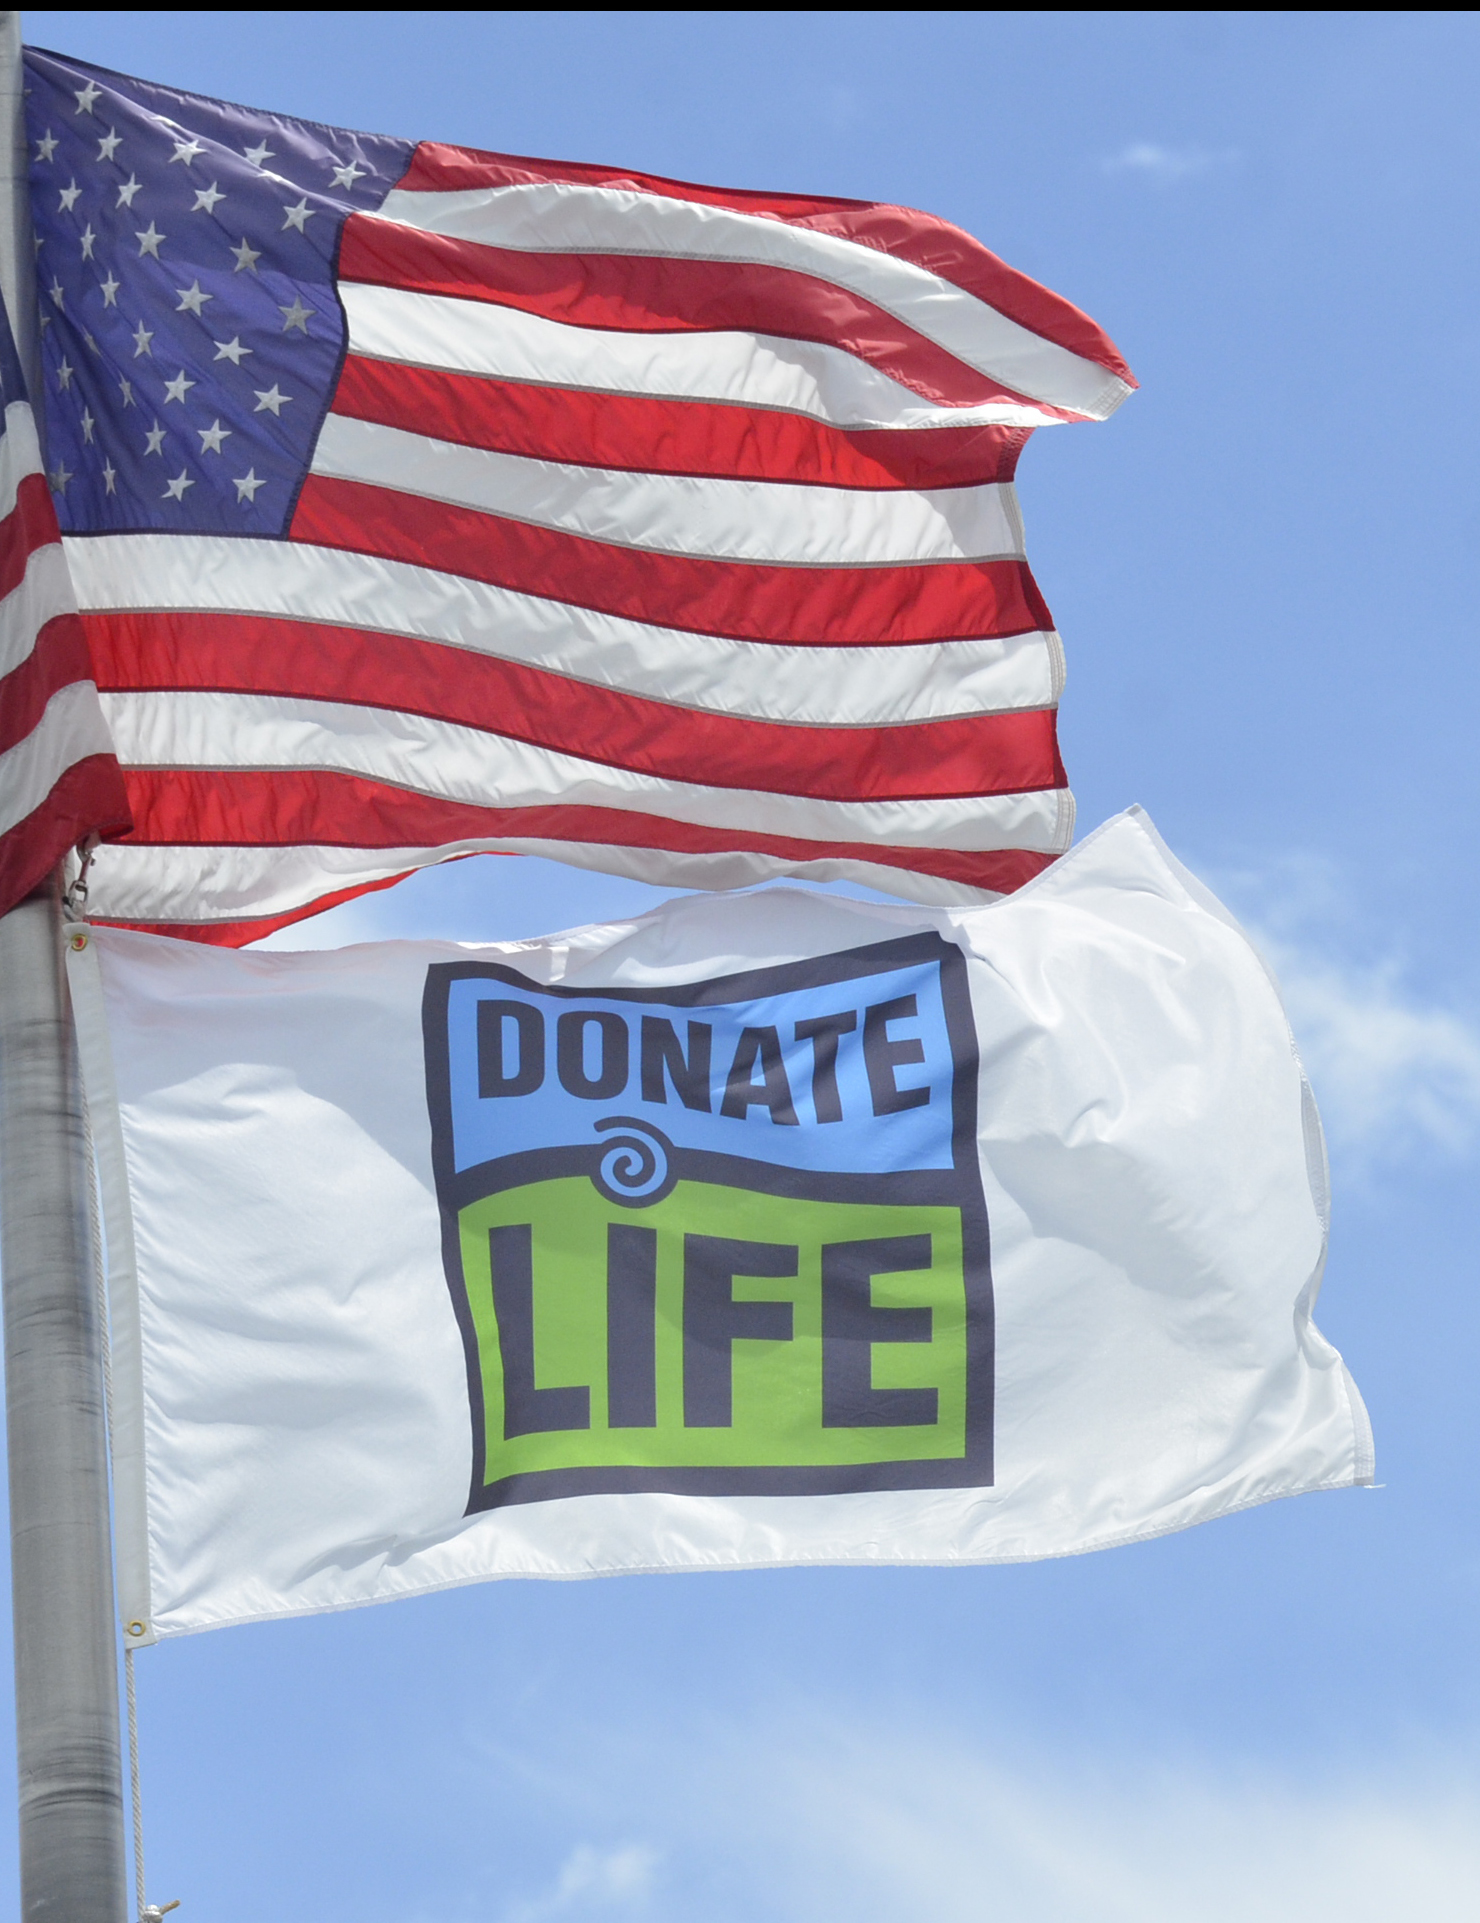 The flag will be donated to the family of the organ donor.